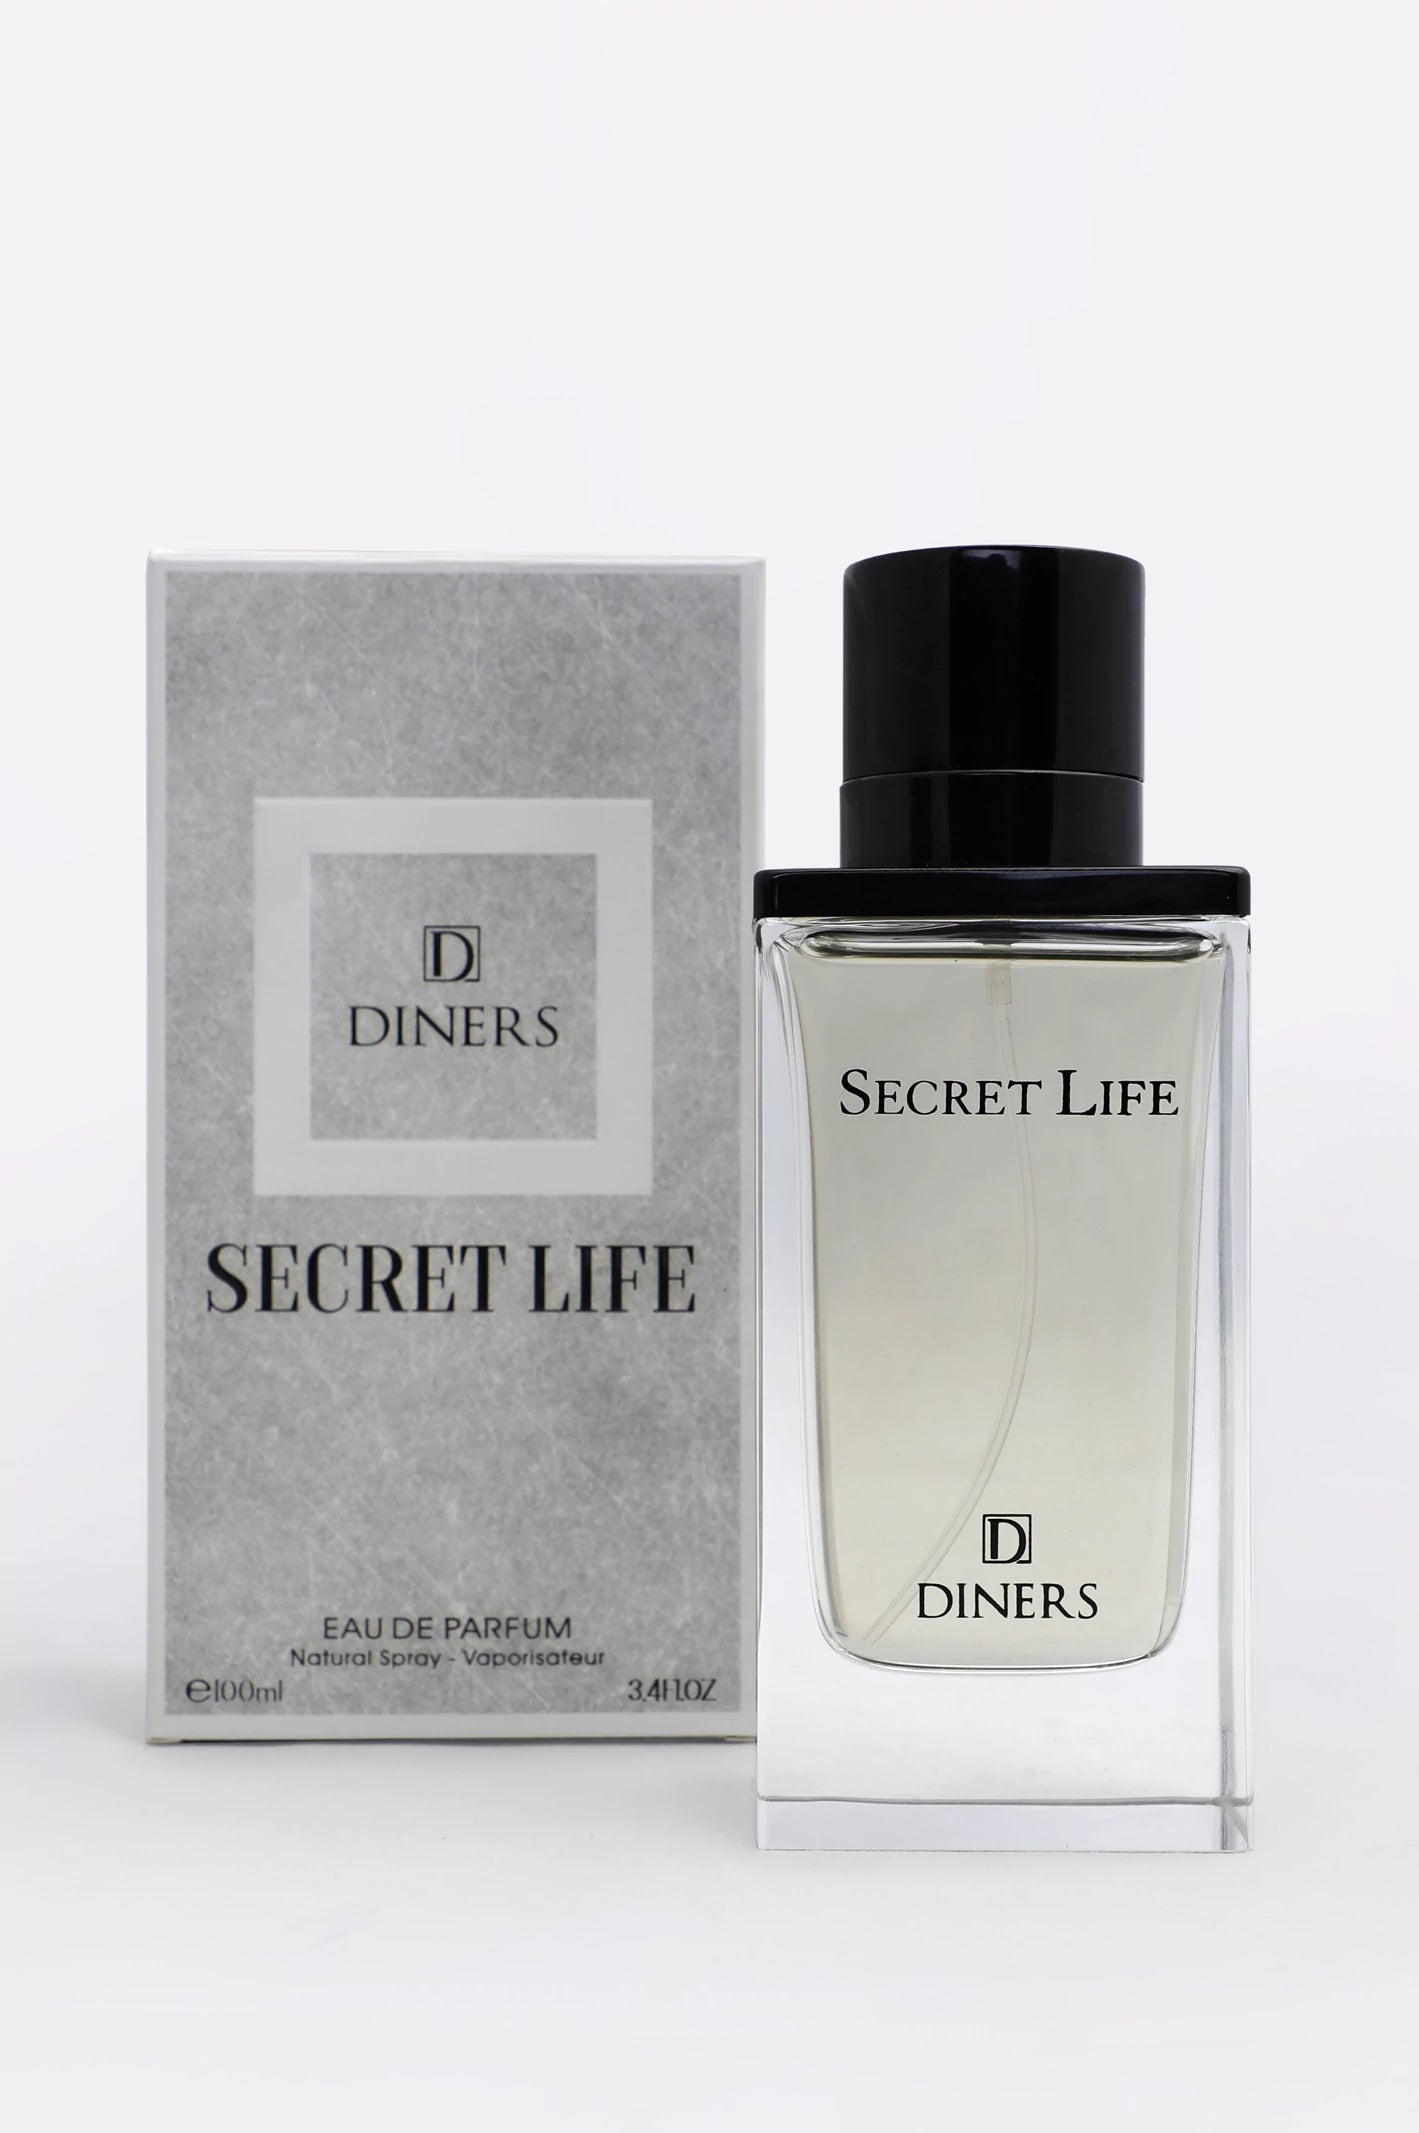 SECRET LIFE for Men From Diners